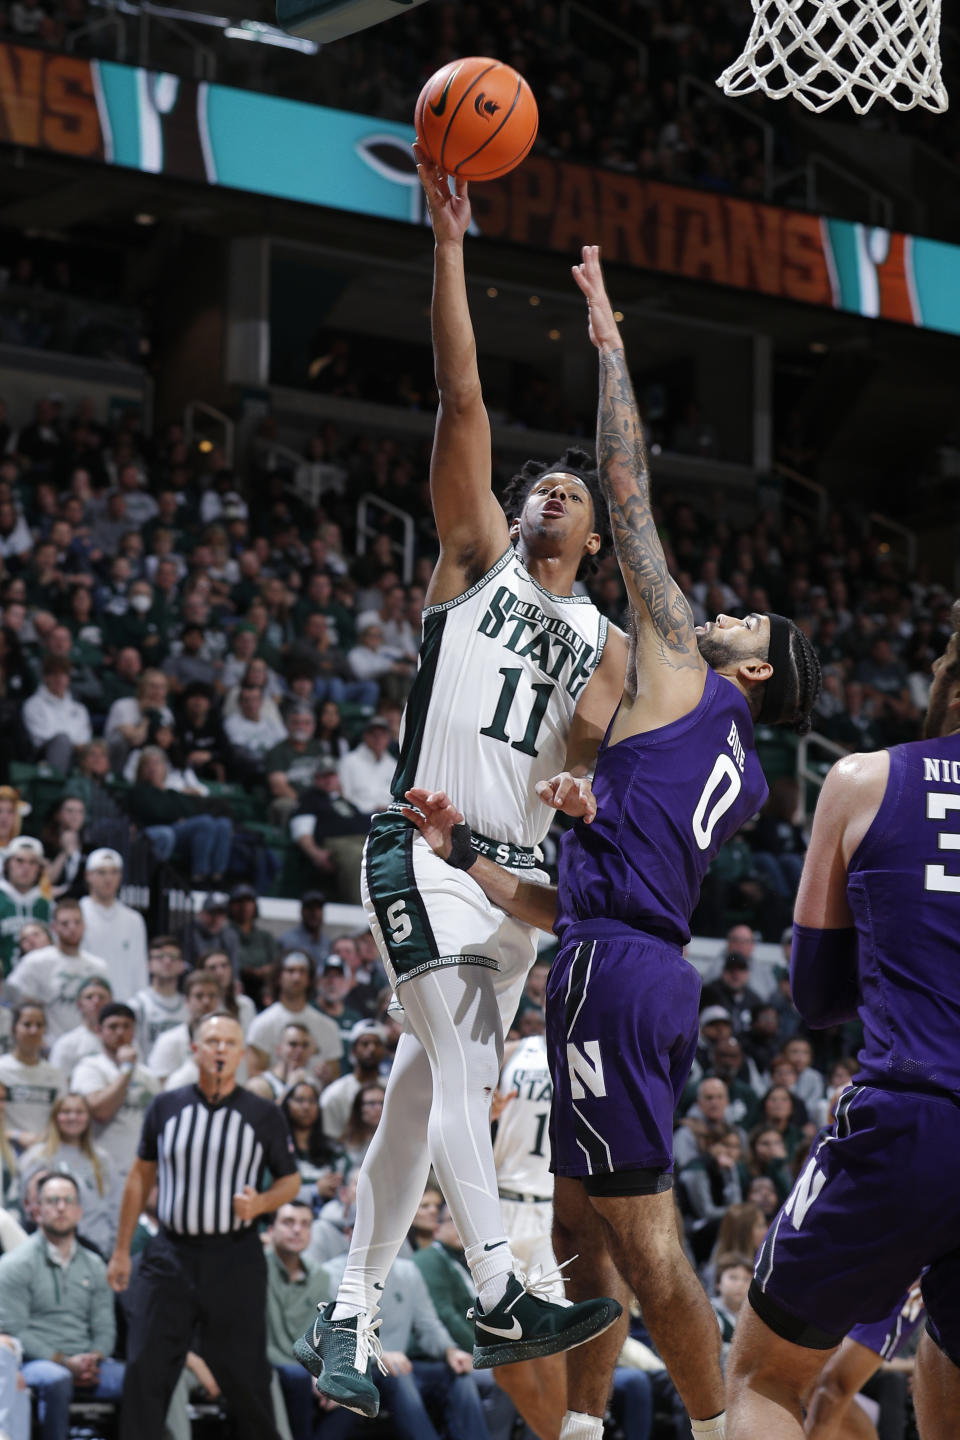 Michigan State's A.J. Hoggard, left, shoots against Northwestern's Boo Buie during the first half of an NCAA college basketball game, Sunday, Dec. 4, 2022, in East Lansing, Mich. (AP Photo/Al Goldis)